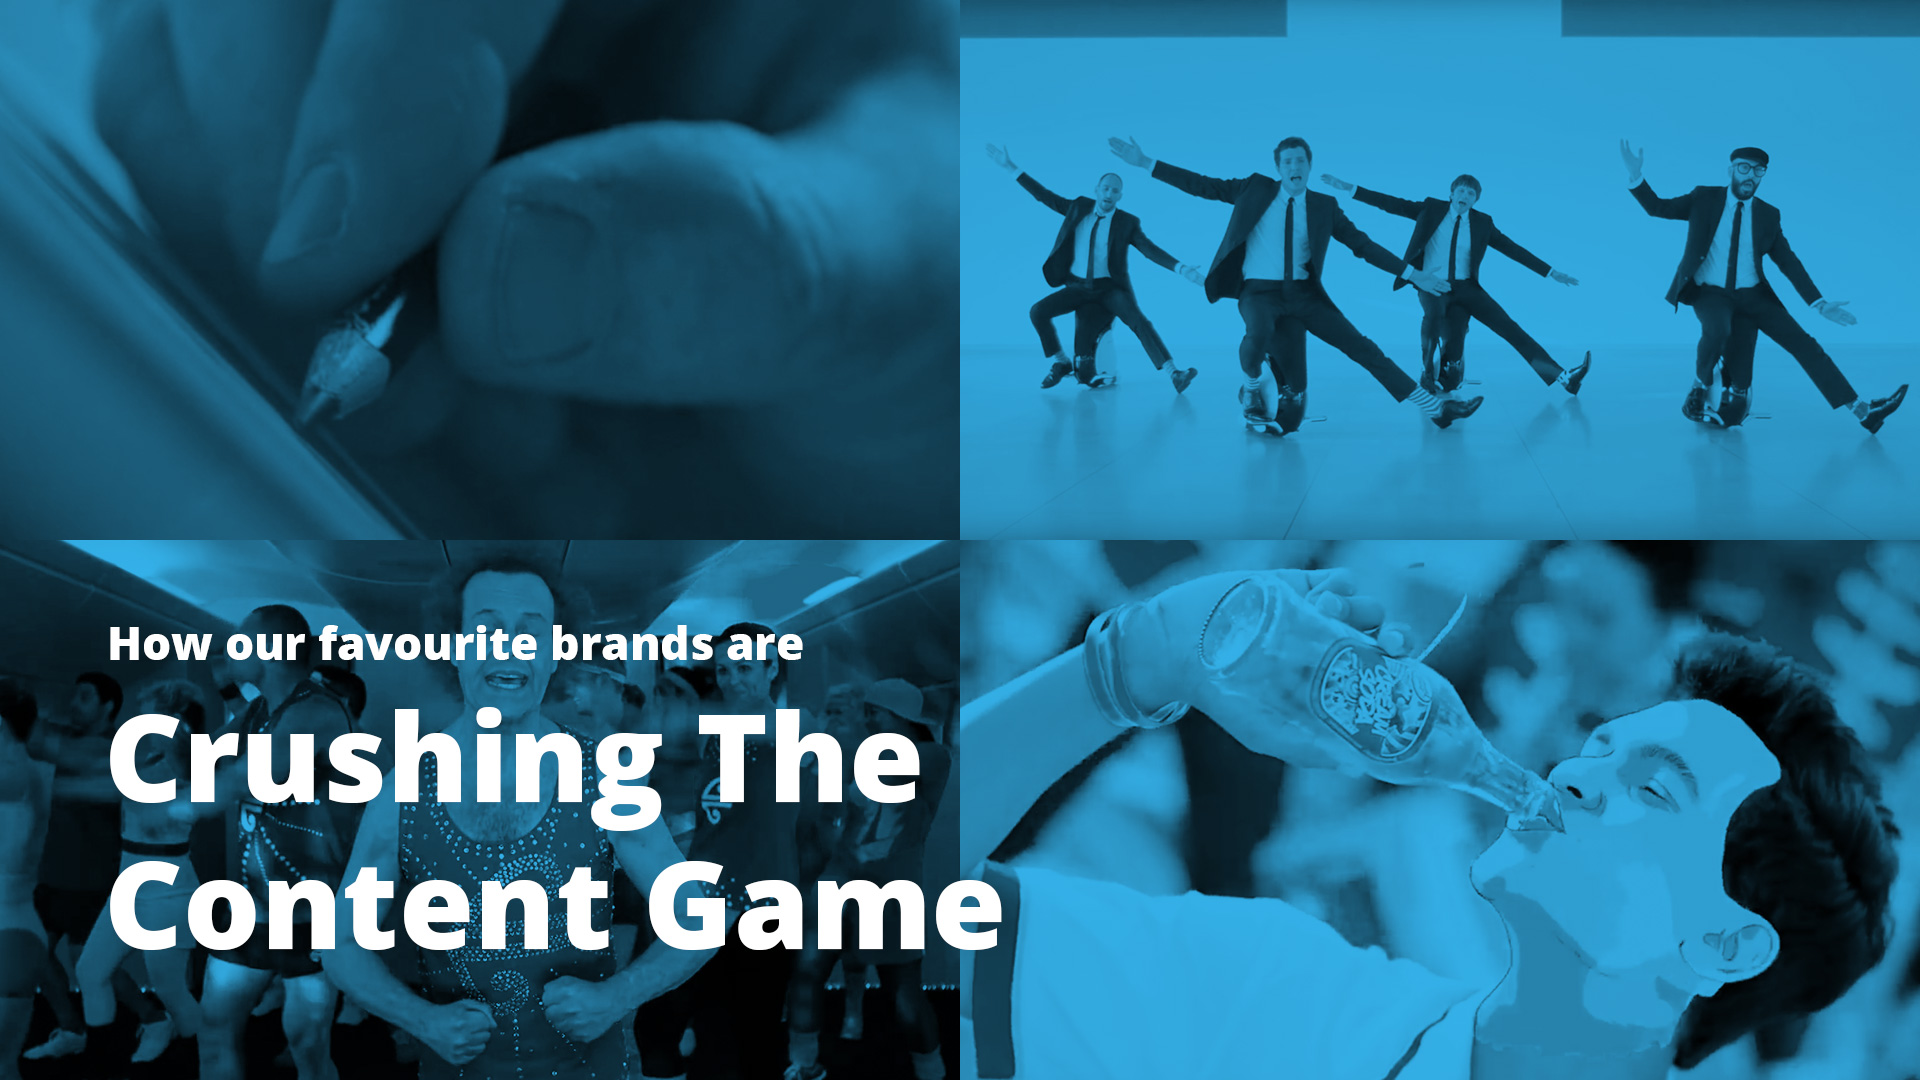 How Wootag’s favourite brands are crushing the content game